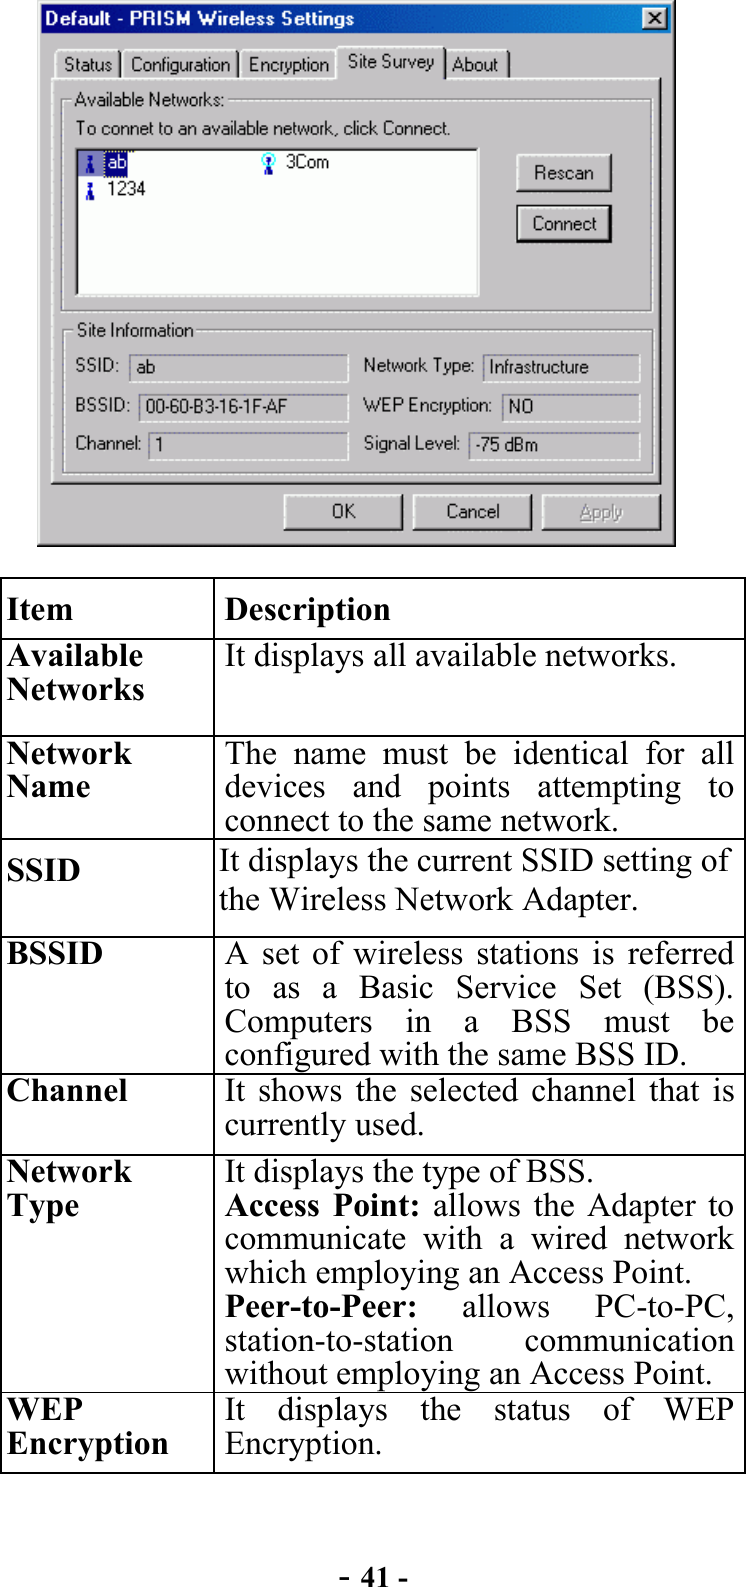  - 41 -  Item Description Available Networks It displays all available networks. Network Name The name must be identical for all devices and points attempting to connect to the same network. SSID  It displays the current SSID setting of the Wireless Network Adapter. BSSID  A set of wireless stations is referred to as a Basic Service Set (BSS). Computers in a BSS must be configured with the same BSS ID. Channel  It shows the selected channel that is currently used. Network Type It displays the type of BSS. Access Point: allows the Adapter to communicate with a wired network which employing an Access Point.   Peer-to-Peer:  allows PC-to-PC, station-to-station communication without employing an Access Point.WEP Encryption It displays the status of WEP Encryption. 